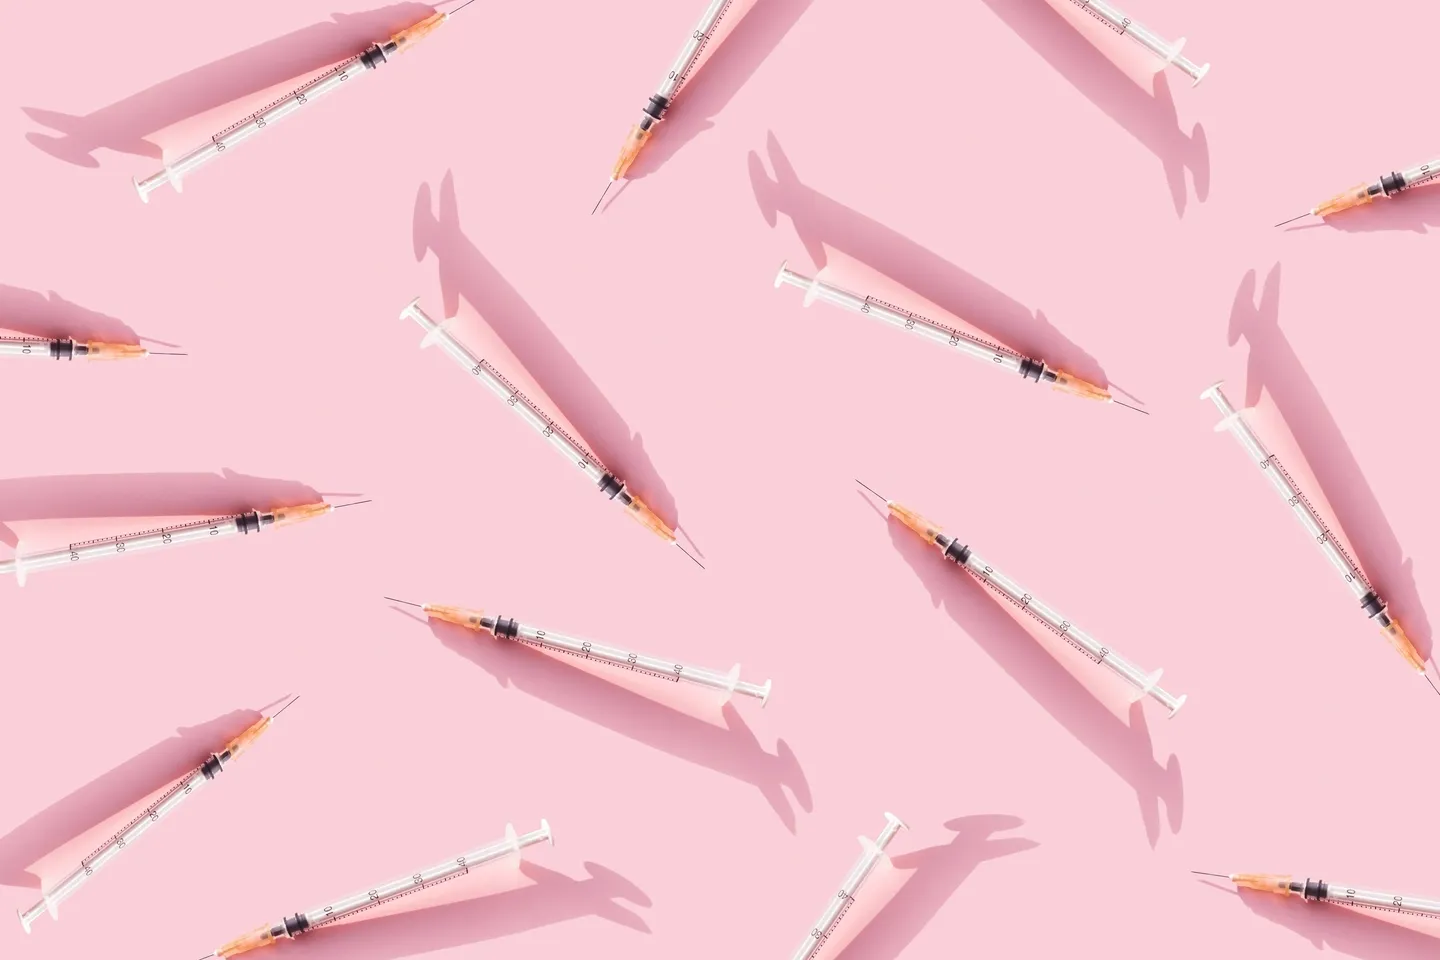 A pink background with many syringes on it.